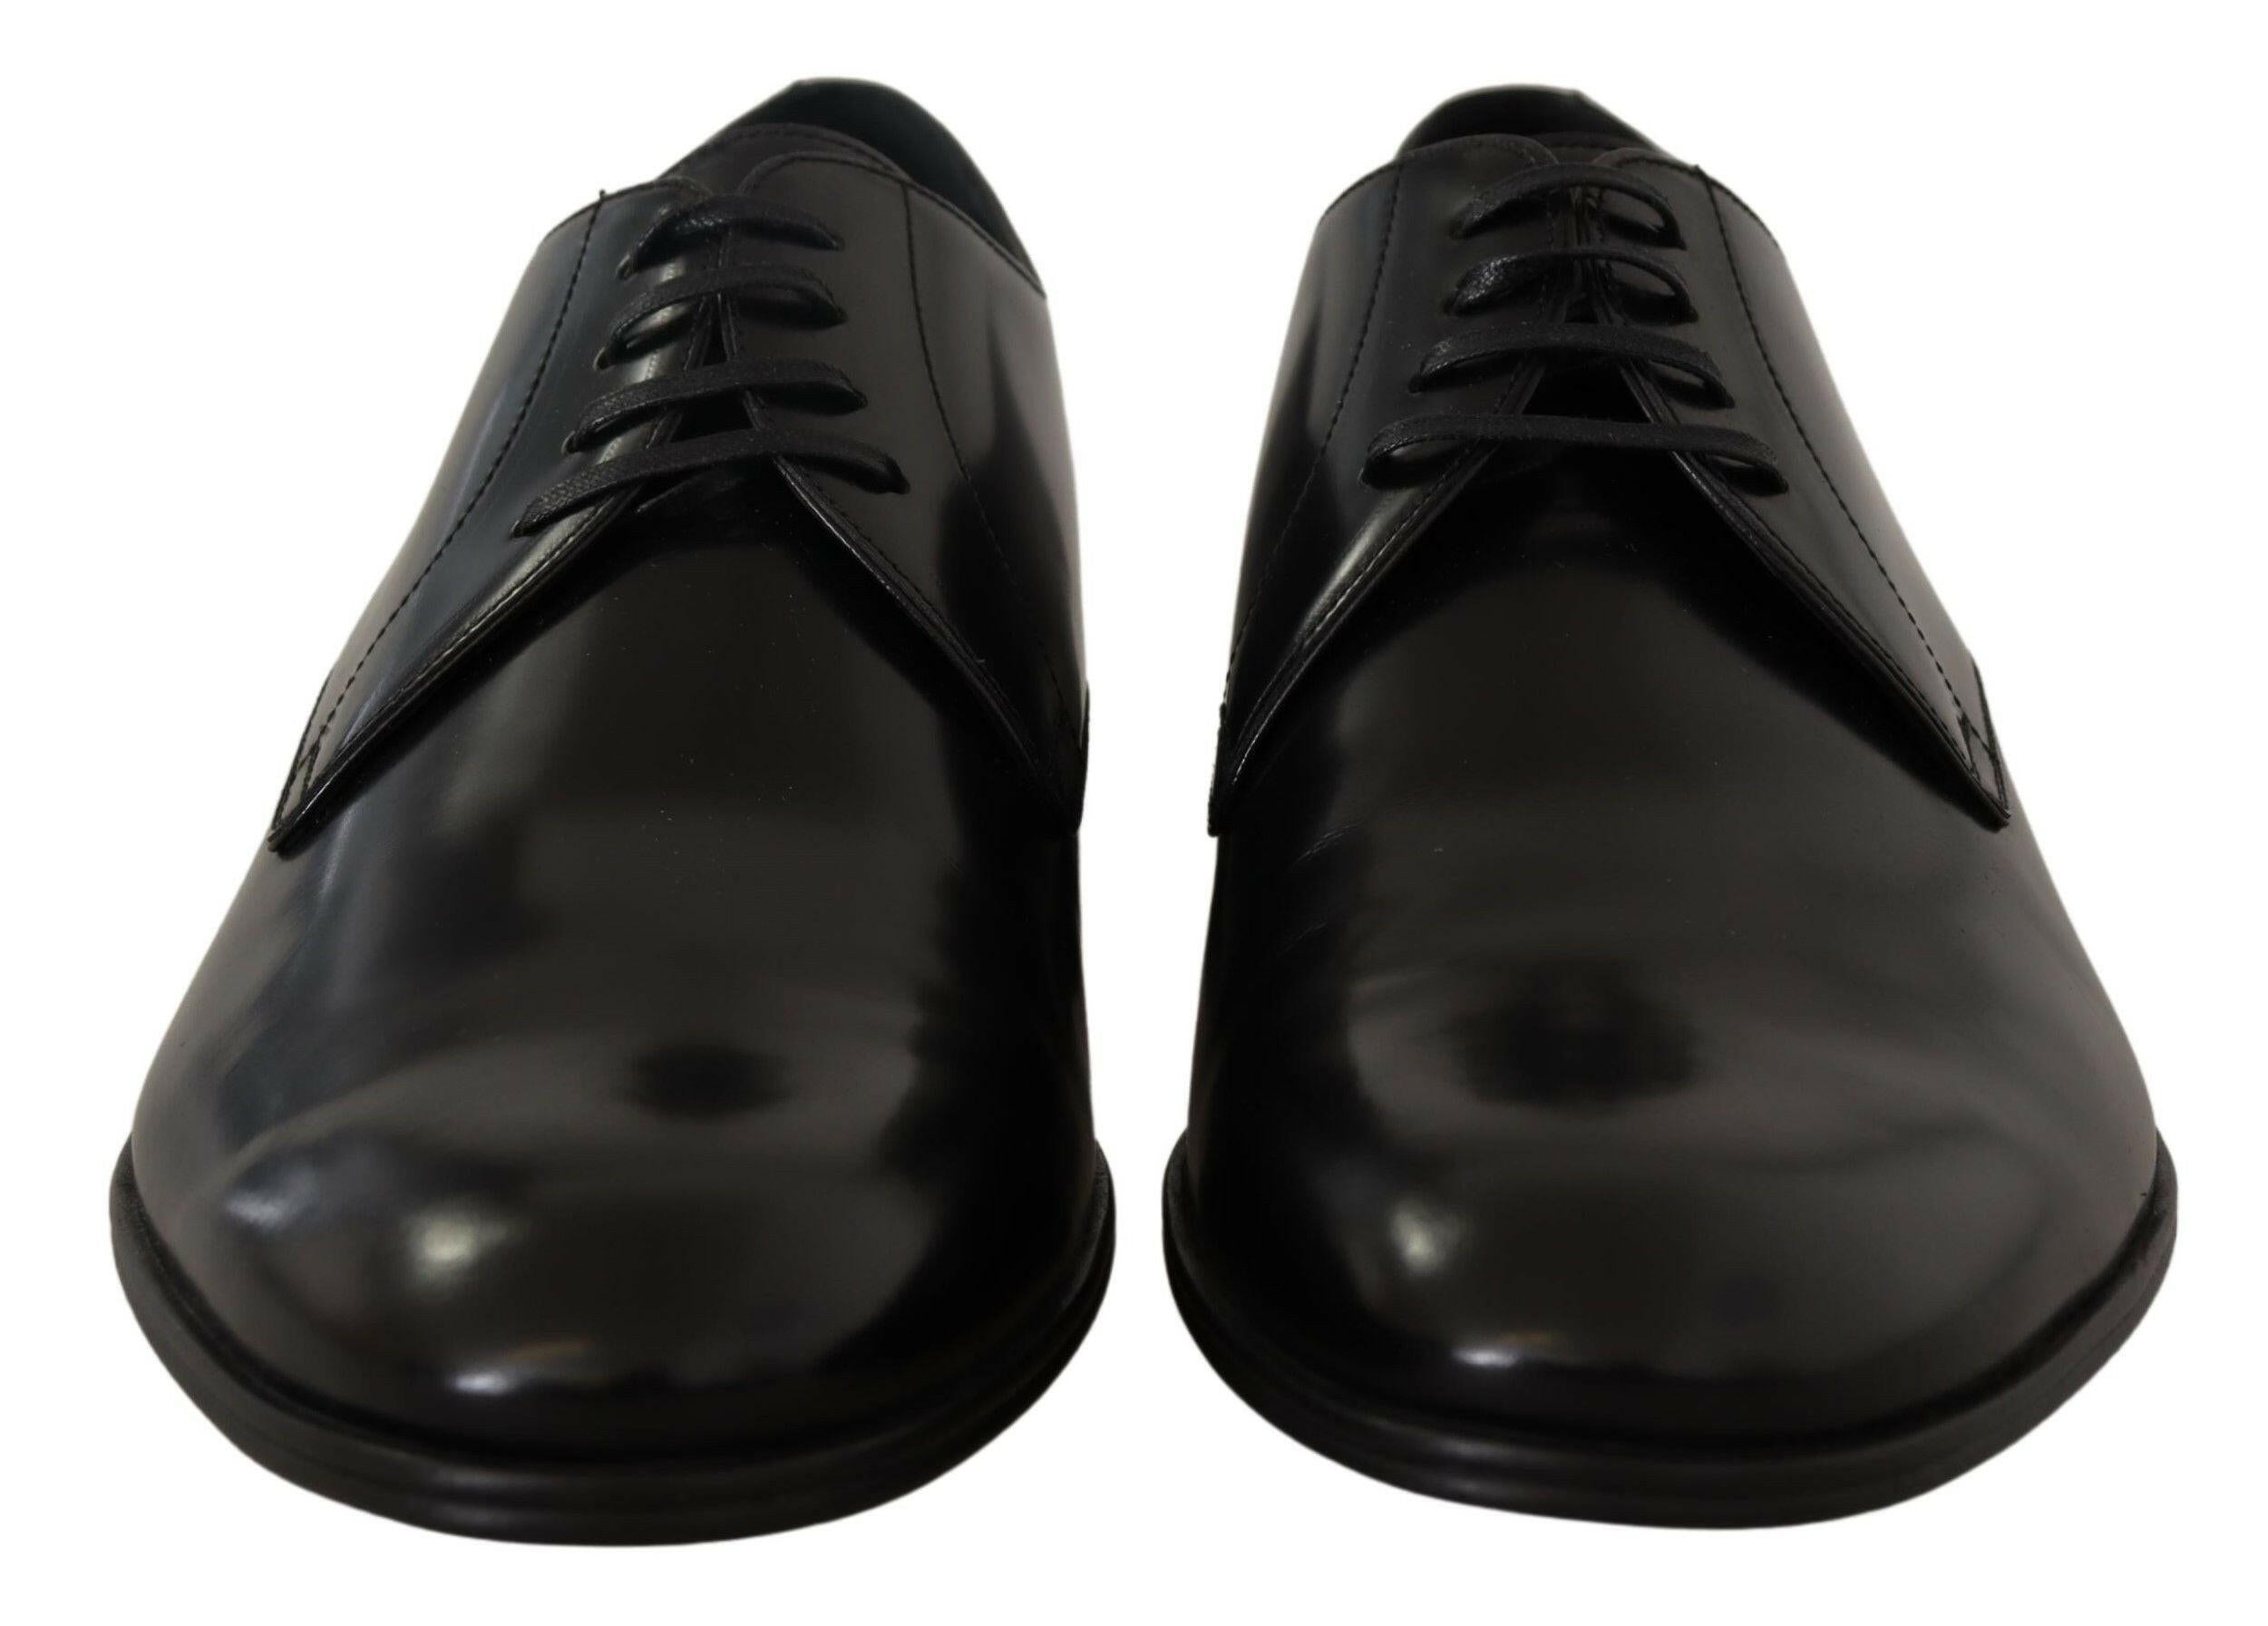 Dolce & Gabbana Black Leather Lace Up Formal Derby Shoes - GENUINE AUTHENTIC BRAND LLC  